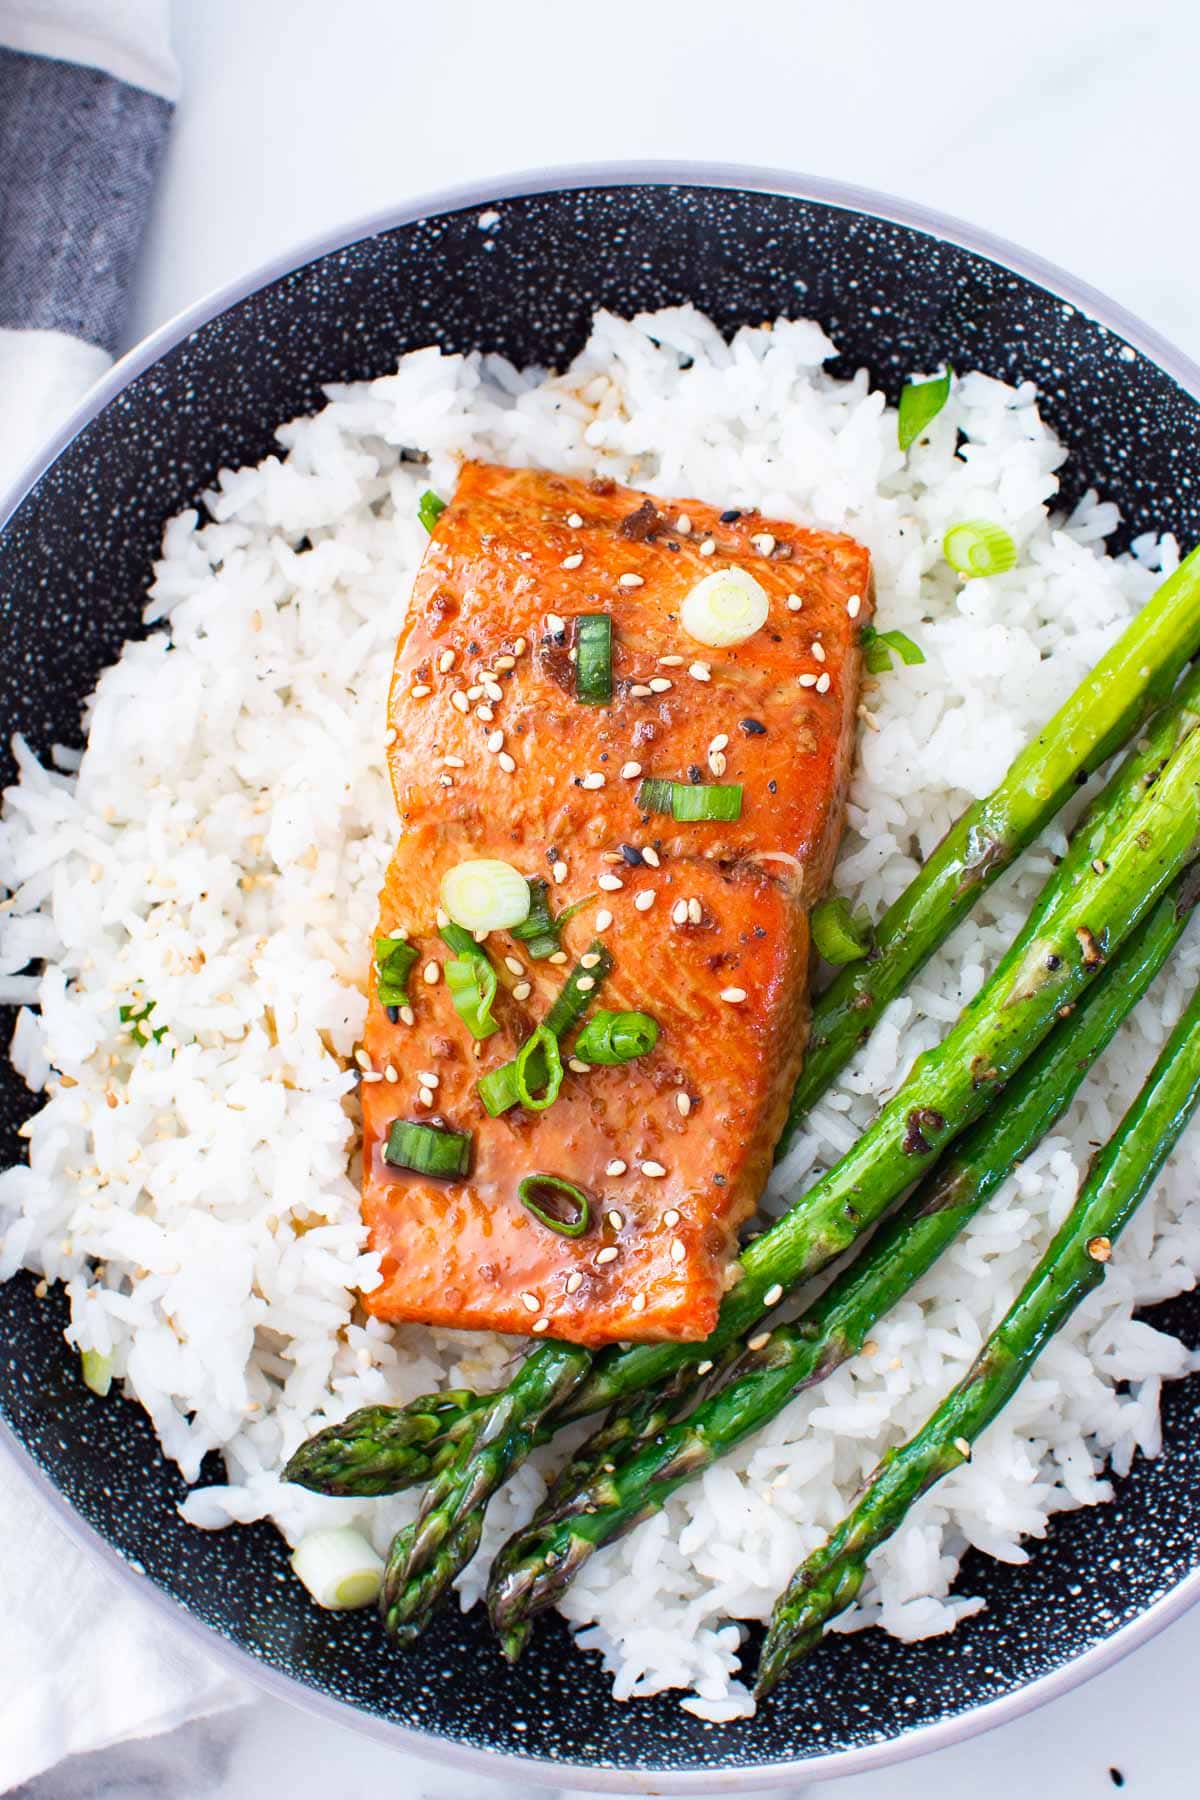 Baked teriyaki salmon plated with rice and asparagus, garnished with green onions.